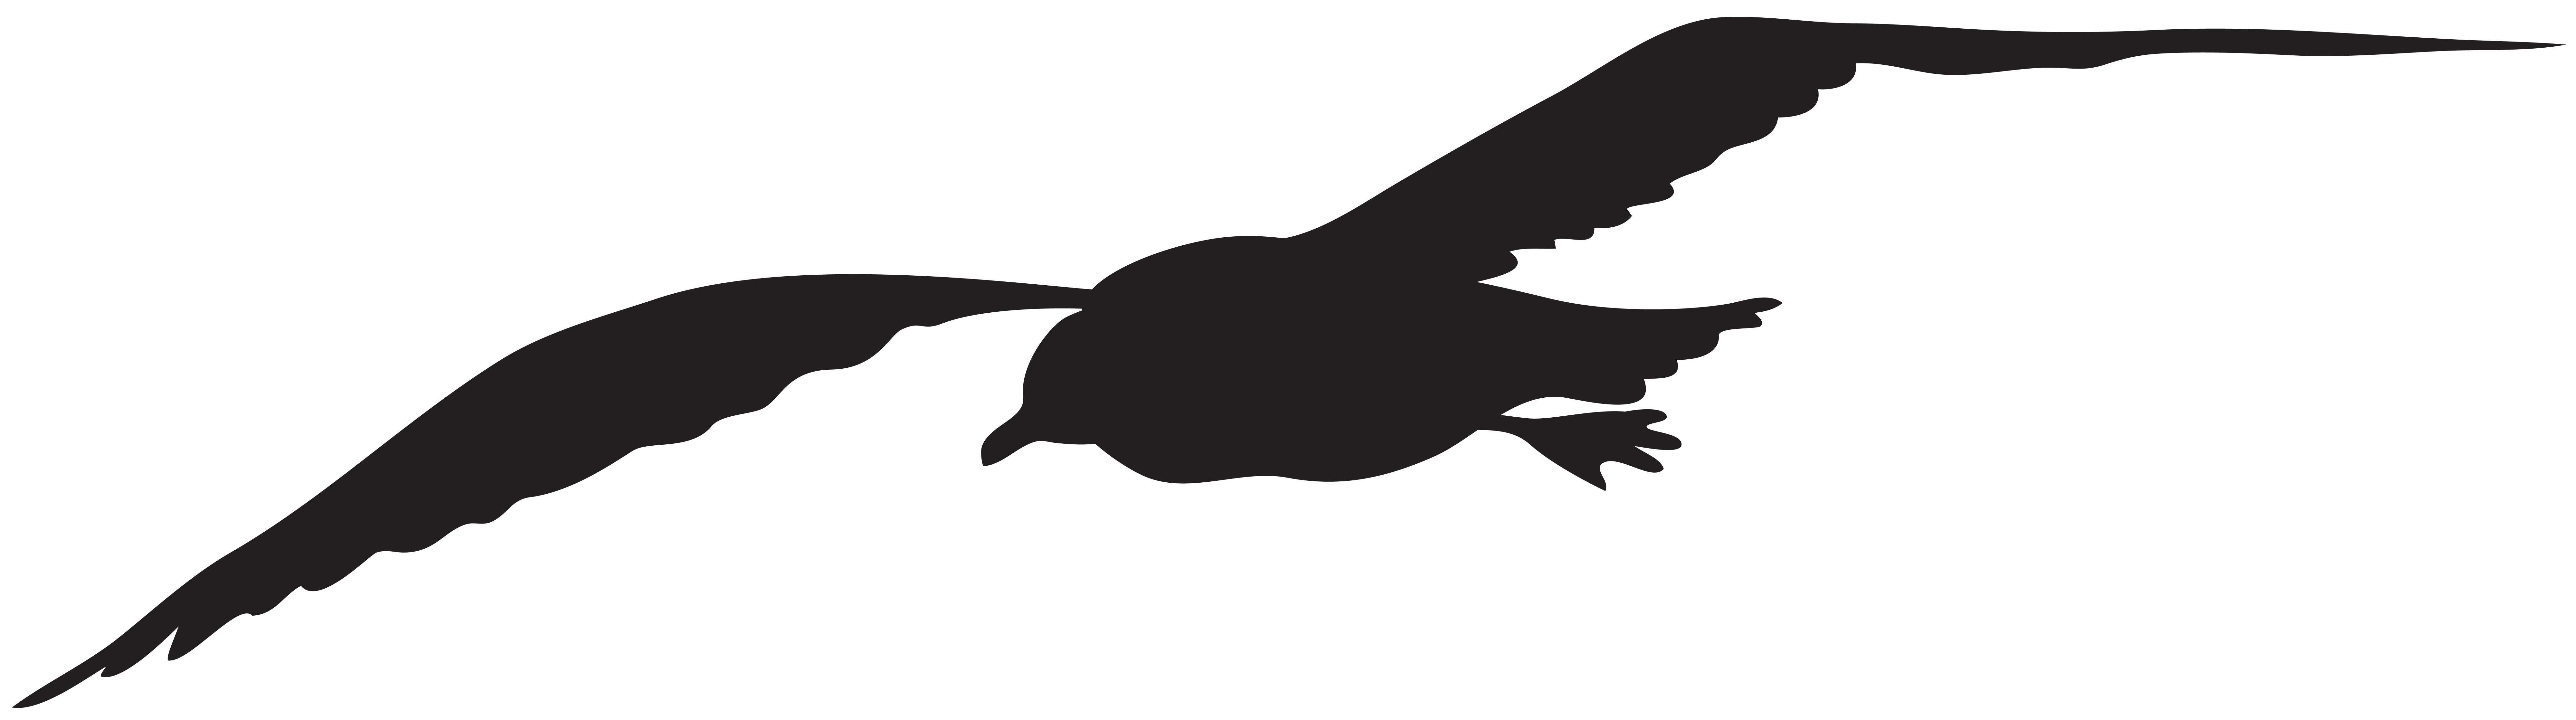 Seagull Silhouette PNG Clip Art Image